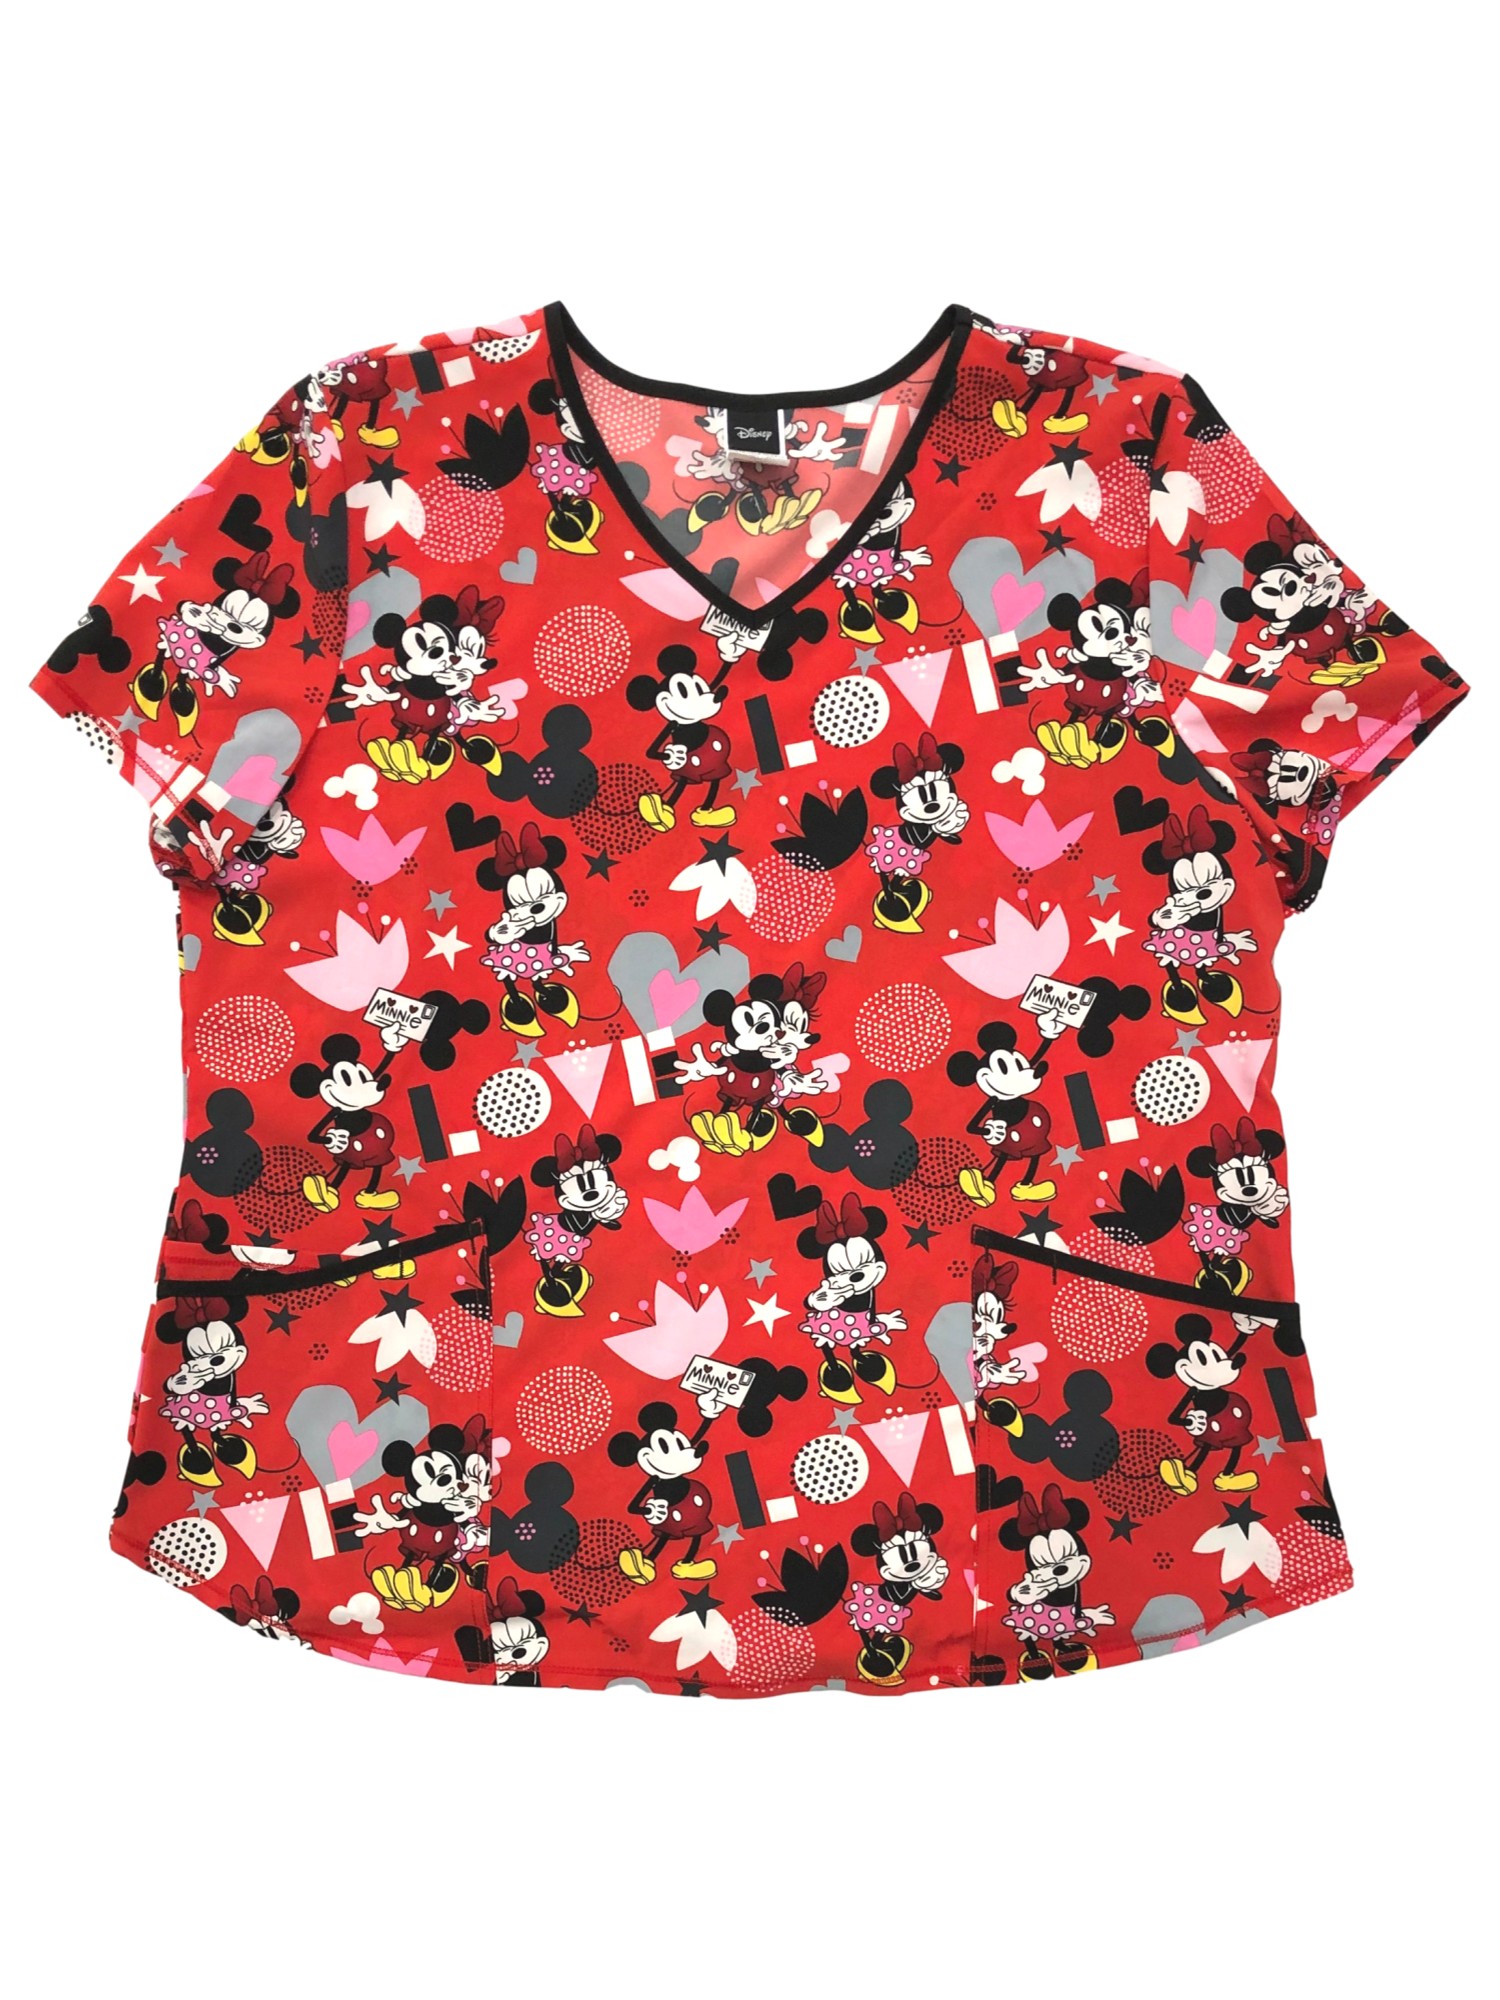 Disney Womens Red Stretch Minnie Mouse Valentines Medical Scrubs Shirt